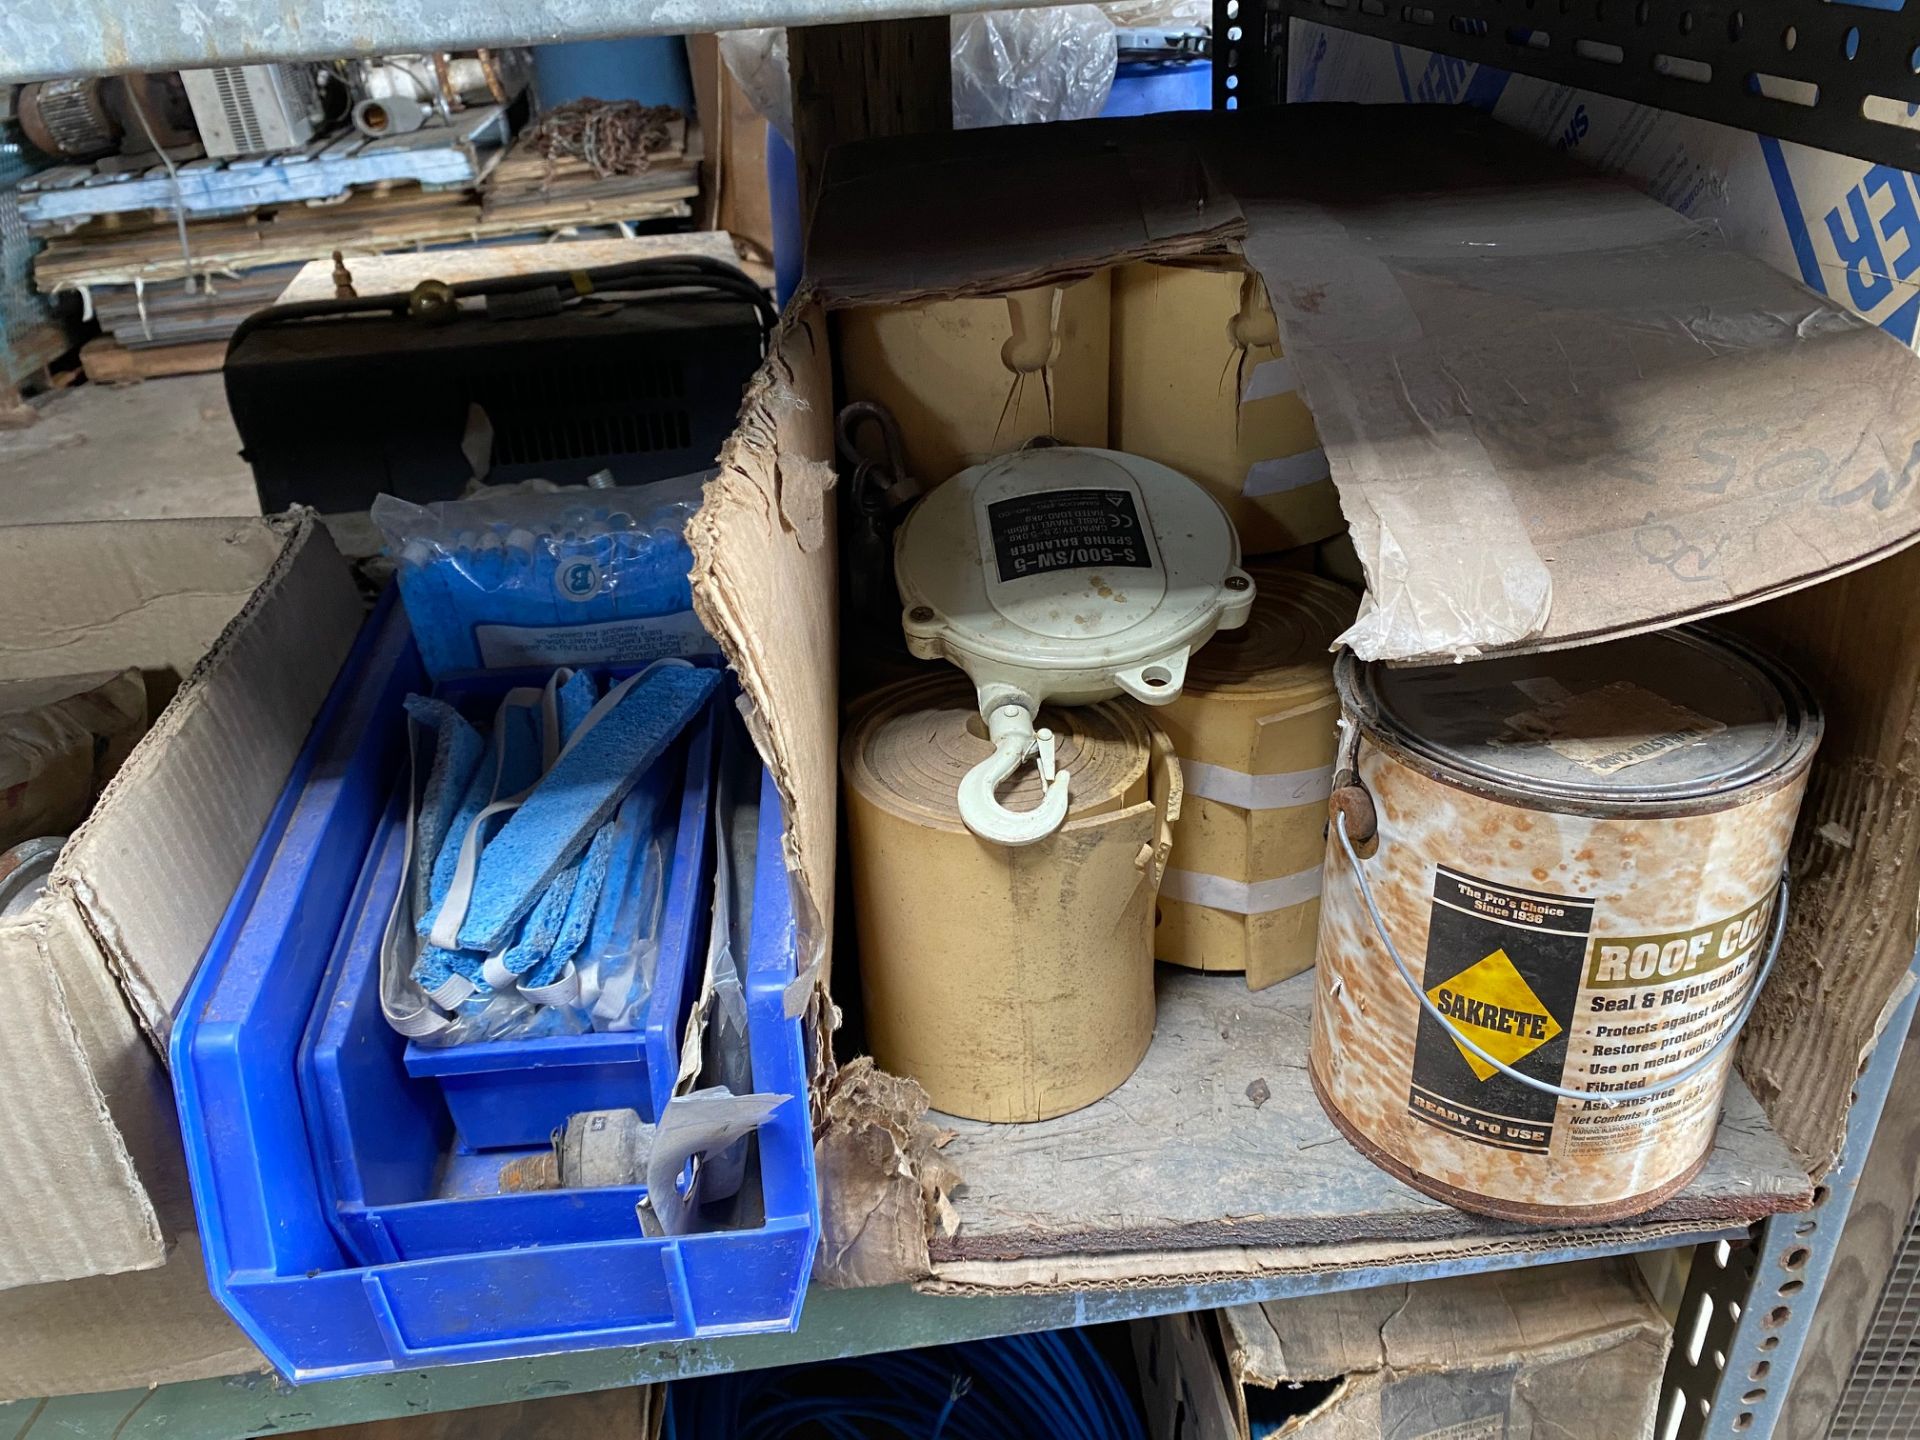 LOT CONSISTING OF COMMUNICATION WIRES, WATER PUMPS, DISTRIBUTORS, DIN CONNECTORS, TOOL BALANCER - Image 6 of 13